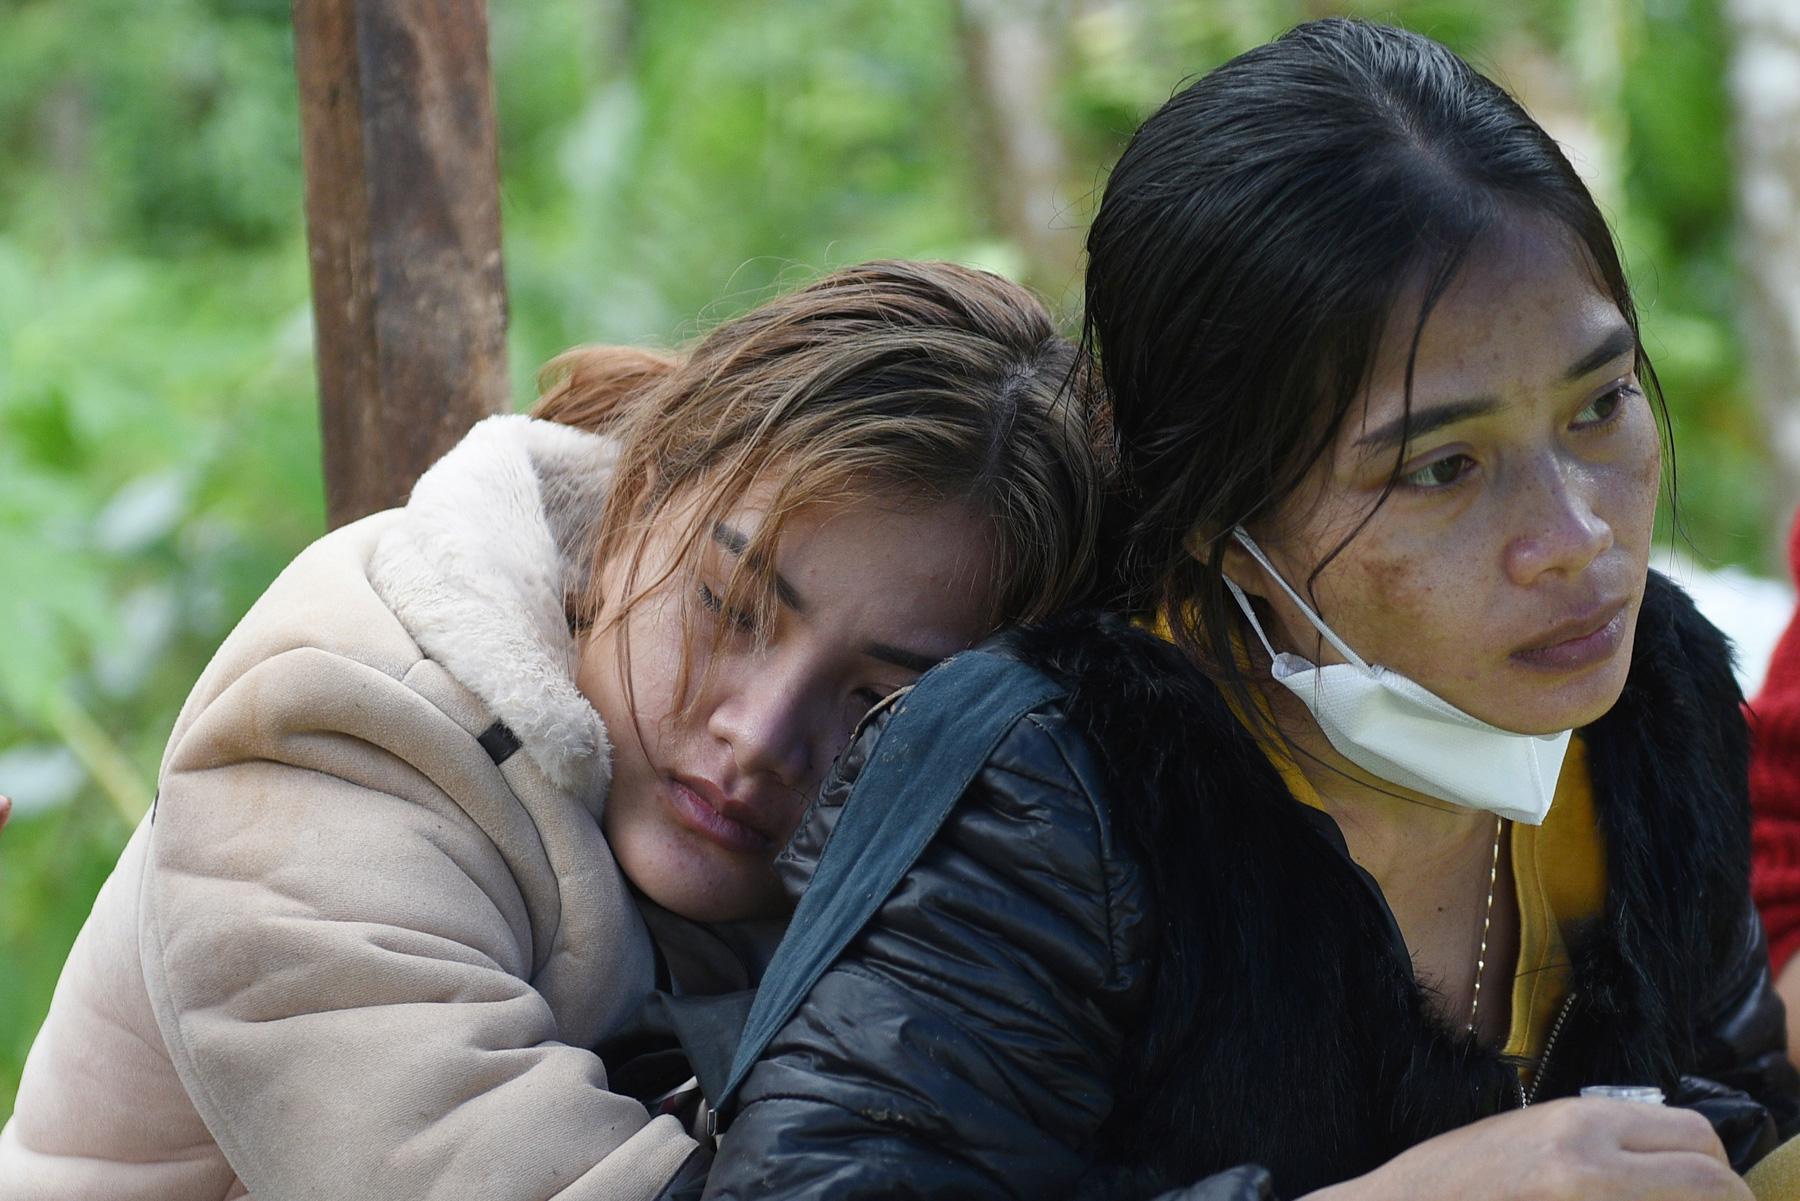 A month with full of sorrow - Ho Thi Hoa rests on her relative's shoulder after...